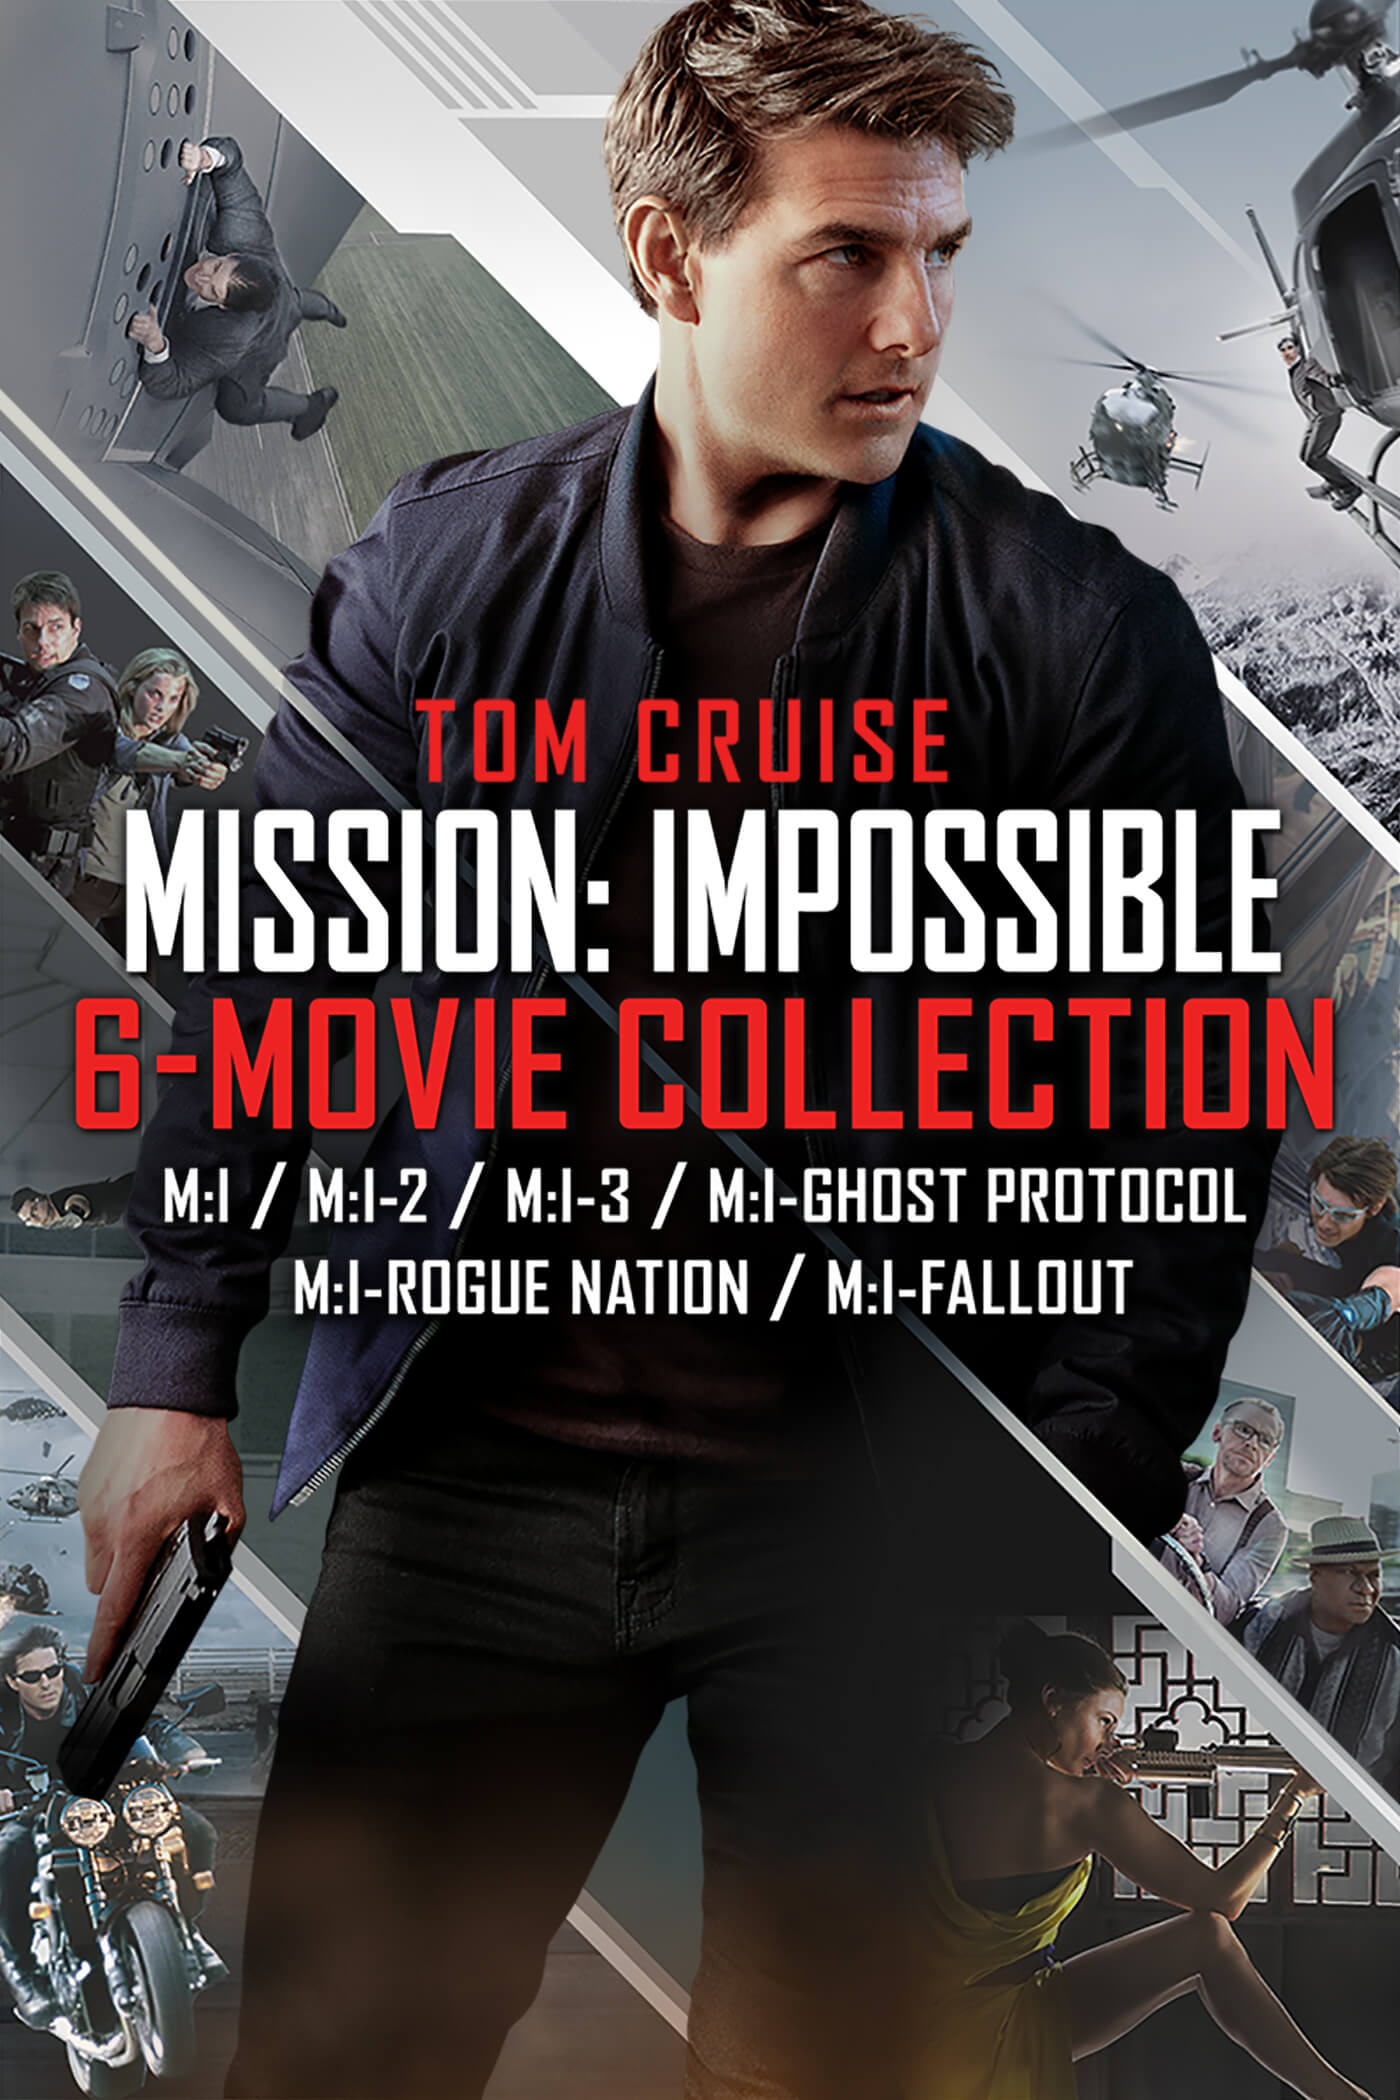 Watch Mission: Impossible 6-Movie Collection DVD/Blu-ray Or Streaming ...